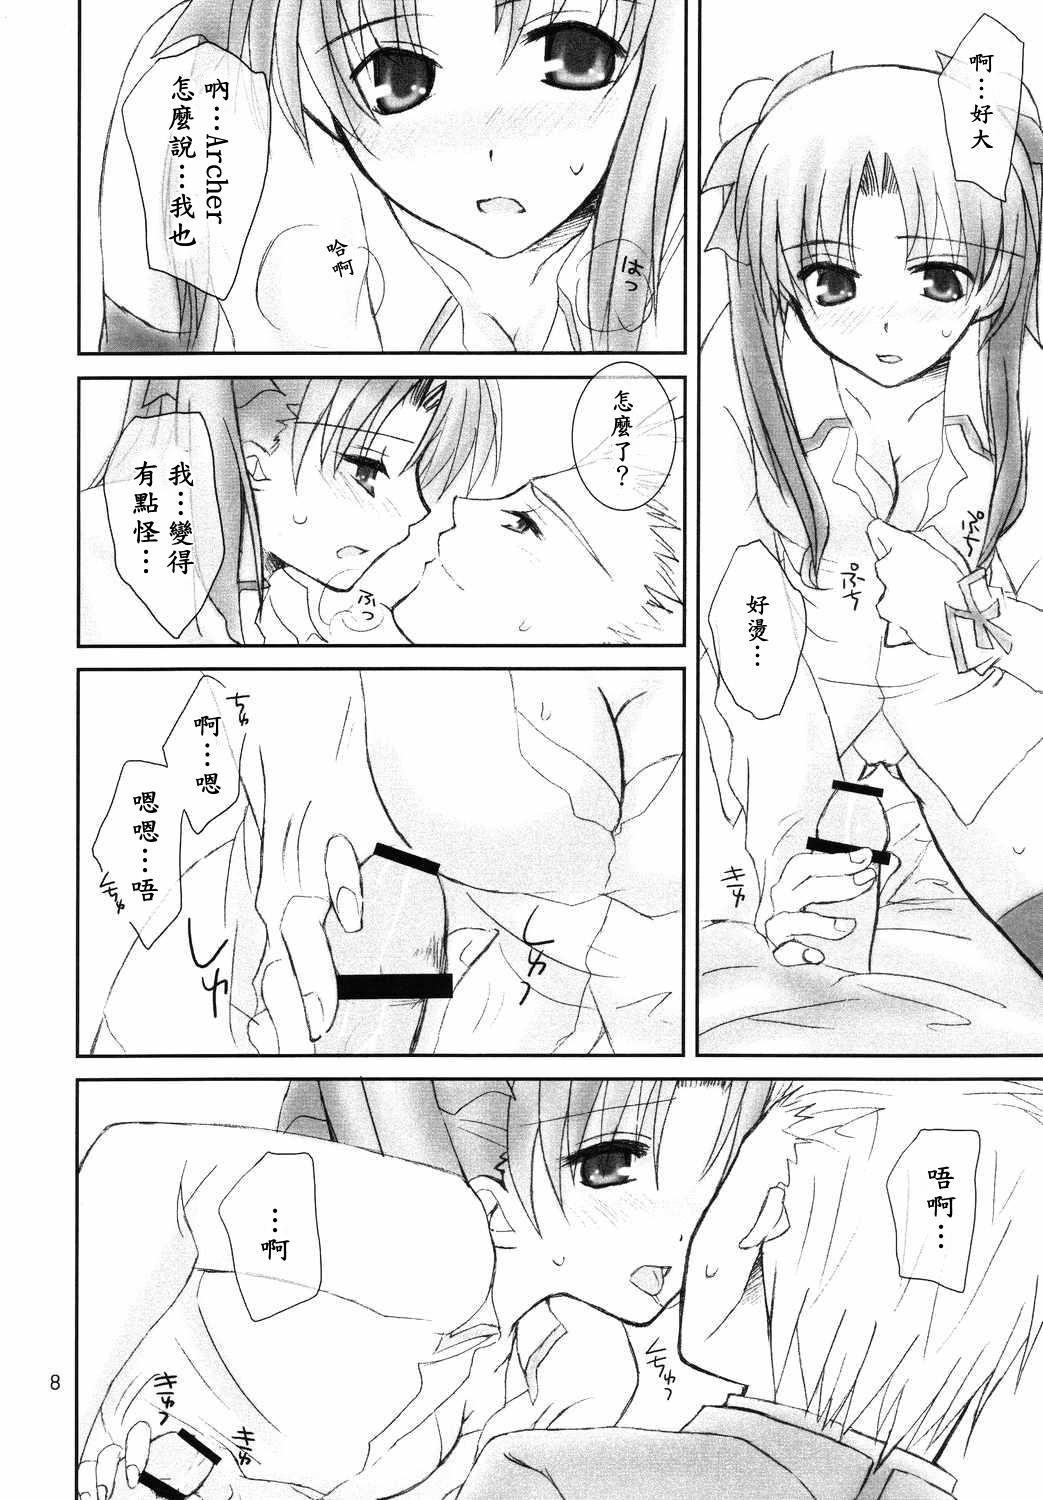 Lesbo Restraint. - Fate stay night Peituda - Page 7